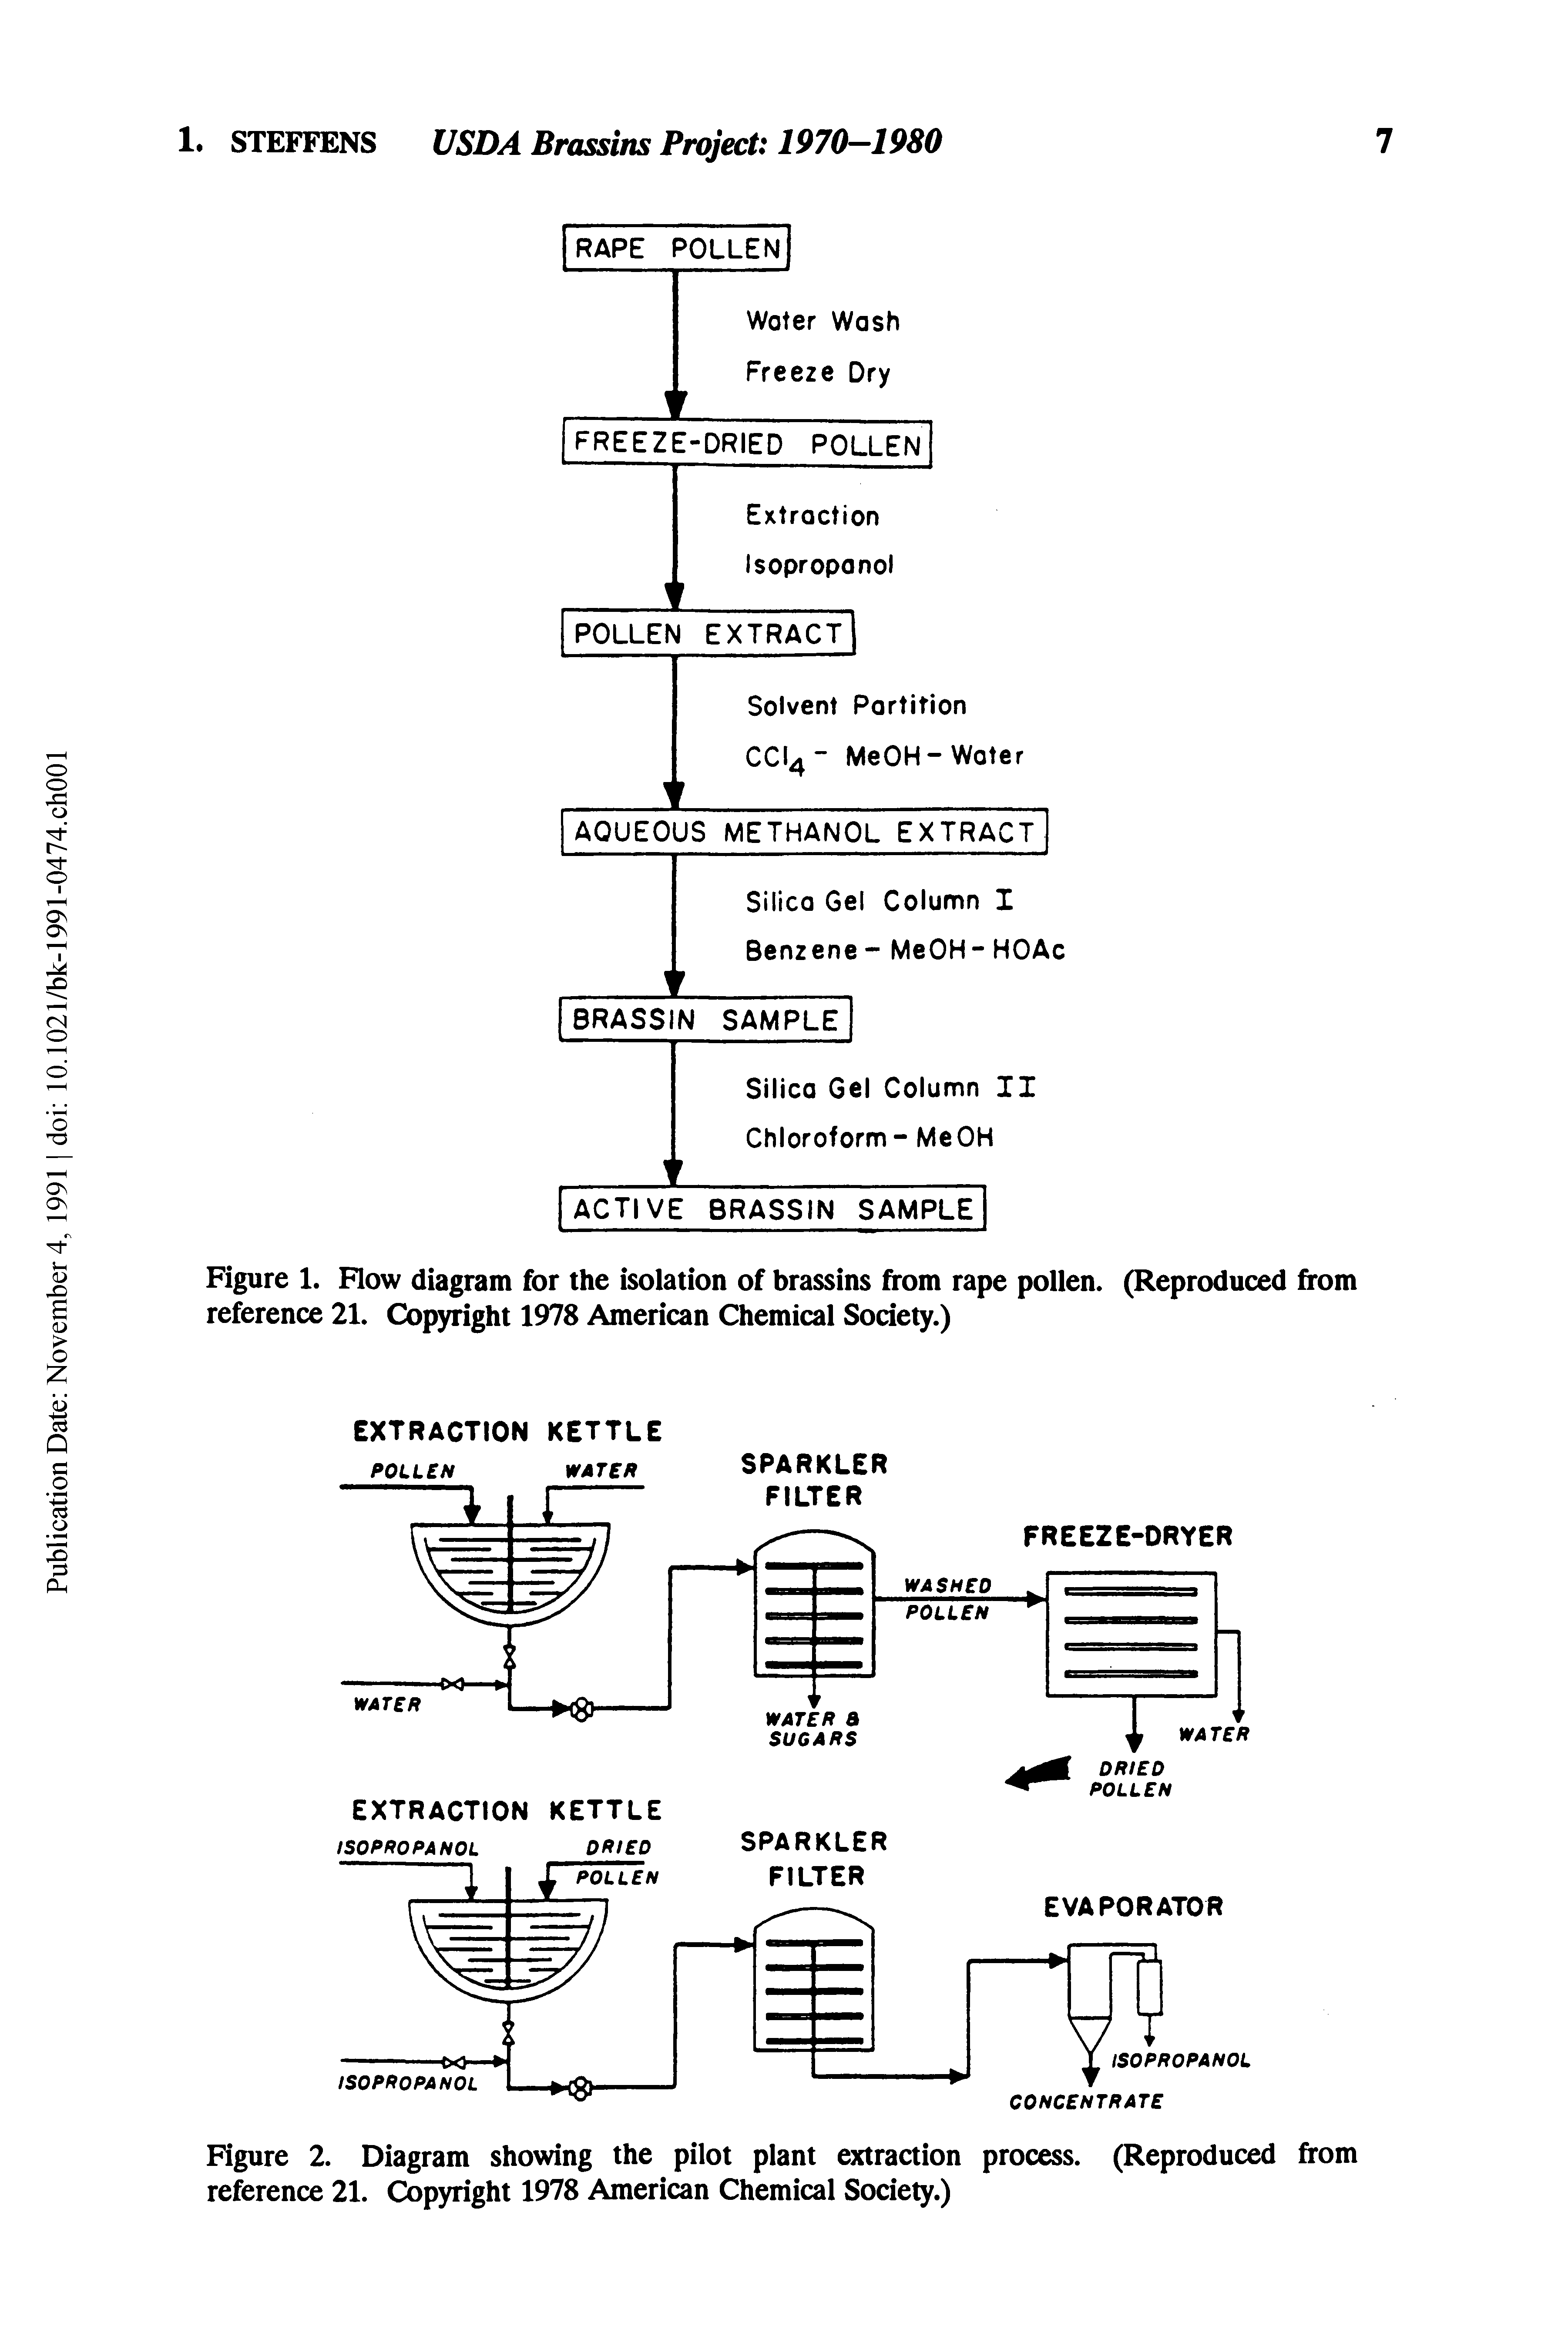 Figure 2. Diagram showing the pilot plant extraction process. (Reproduced from reference 21. Copyright 1978 American Chemical Society.)...